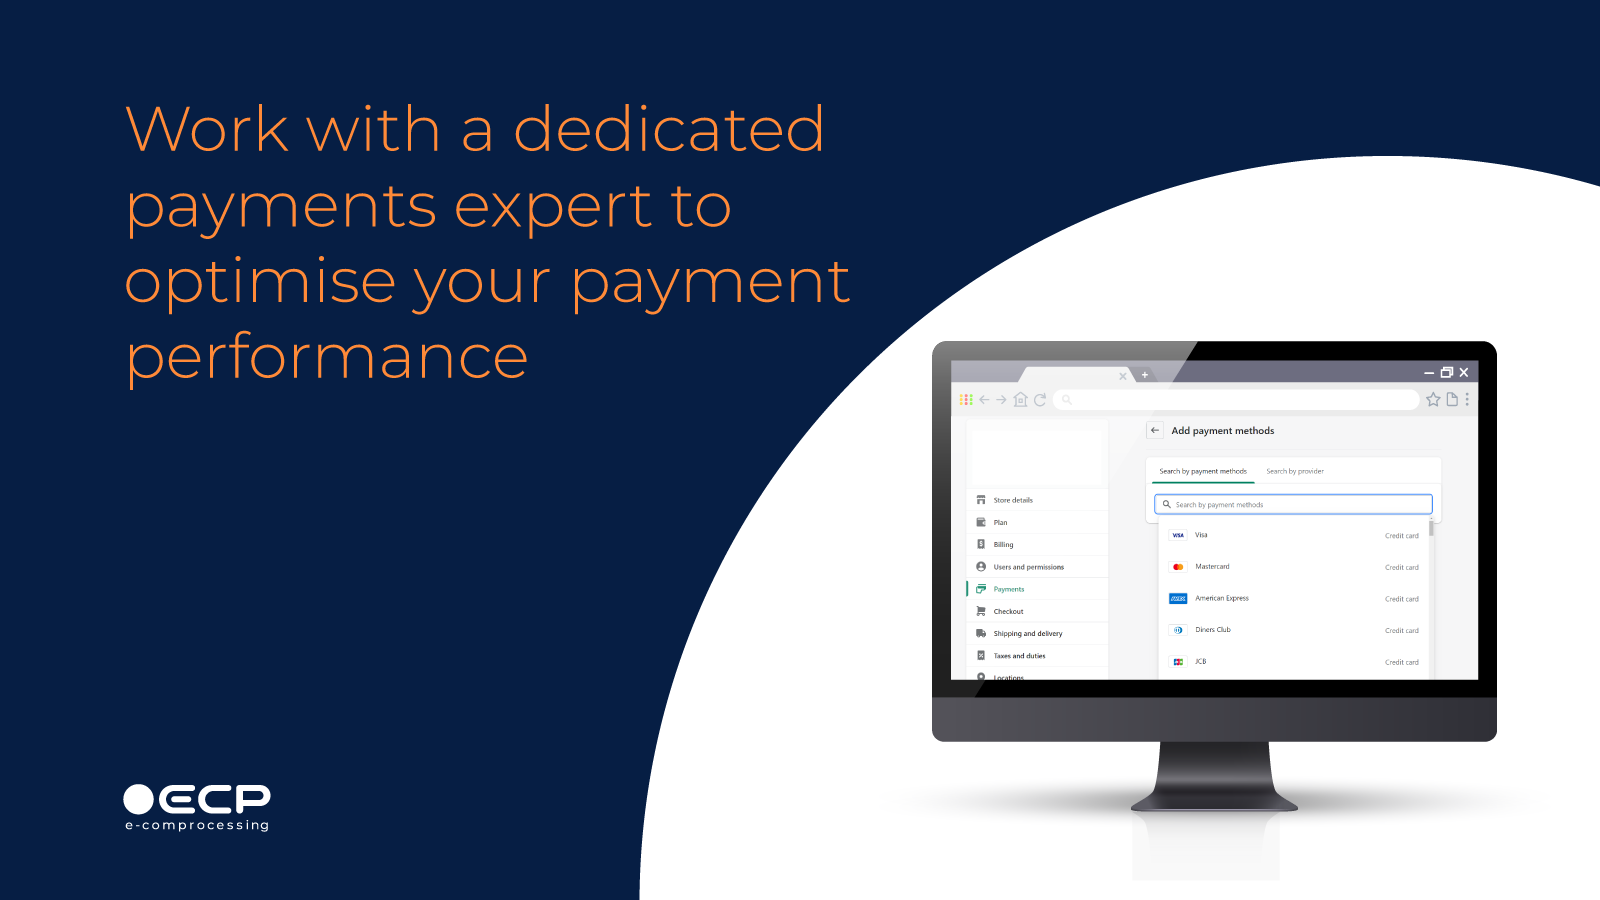 Work with dedicated payment experts